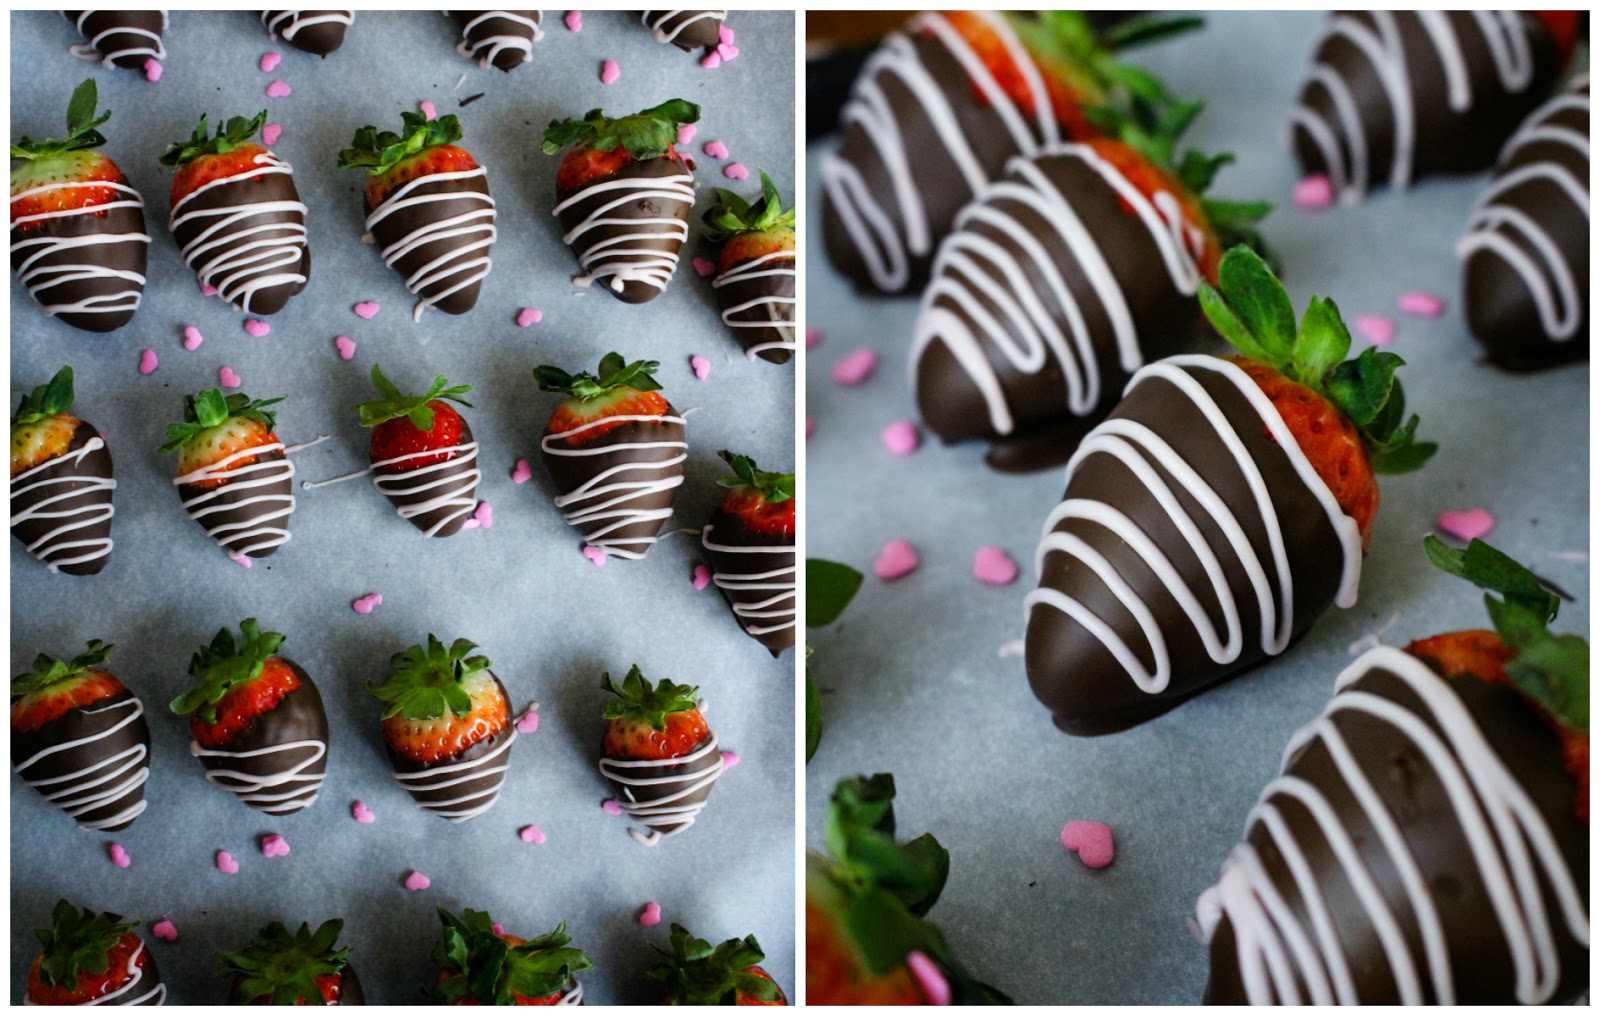 Valentine's Day Chocolate Covered Strawberries make the perfect dessert for you and your sweetheart on Valentine's Day.  You can make them from start to finish in just fifteen minutes! #valentinesdaydessert #strawberries #chocolate